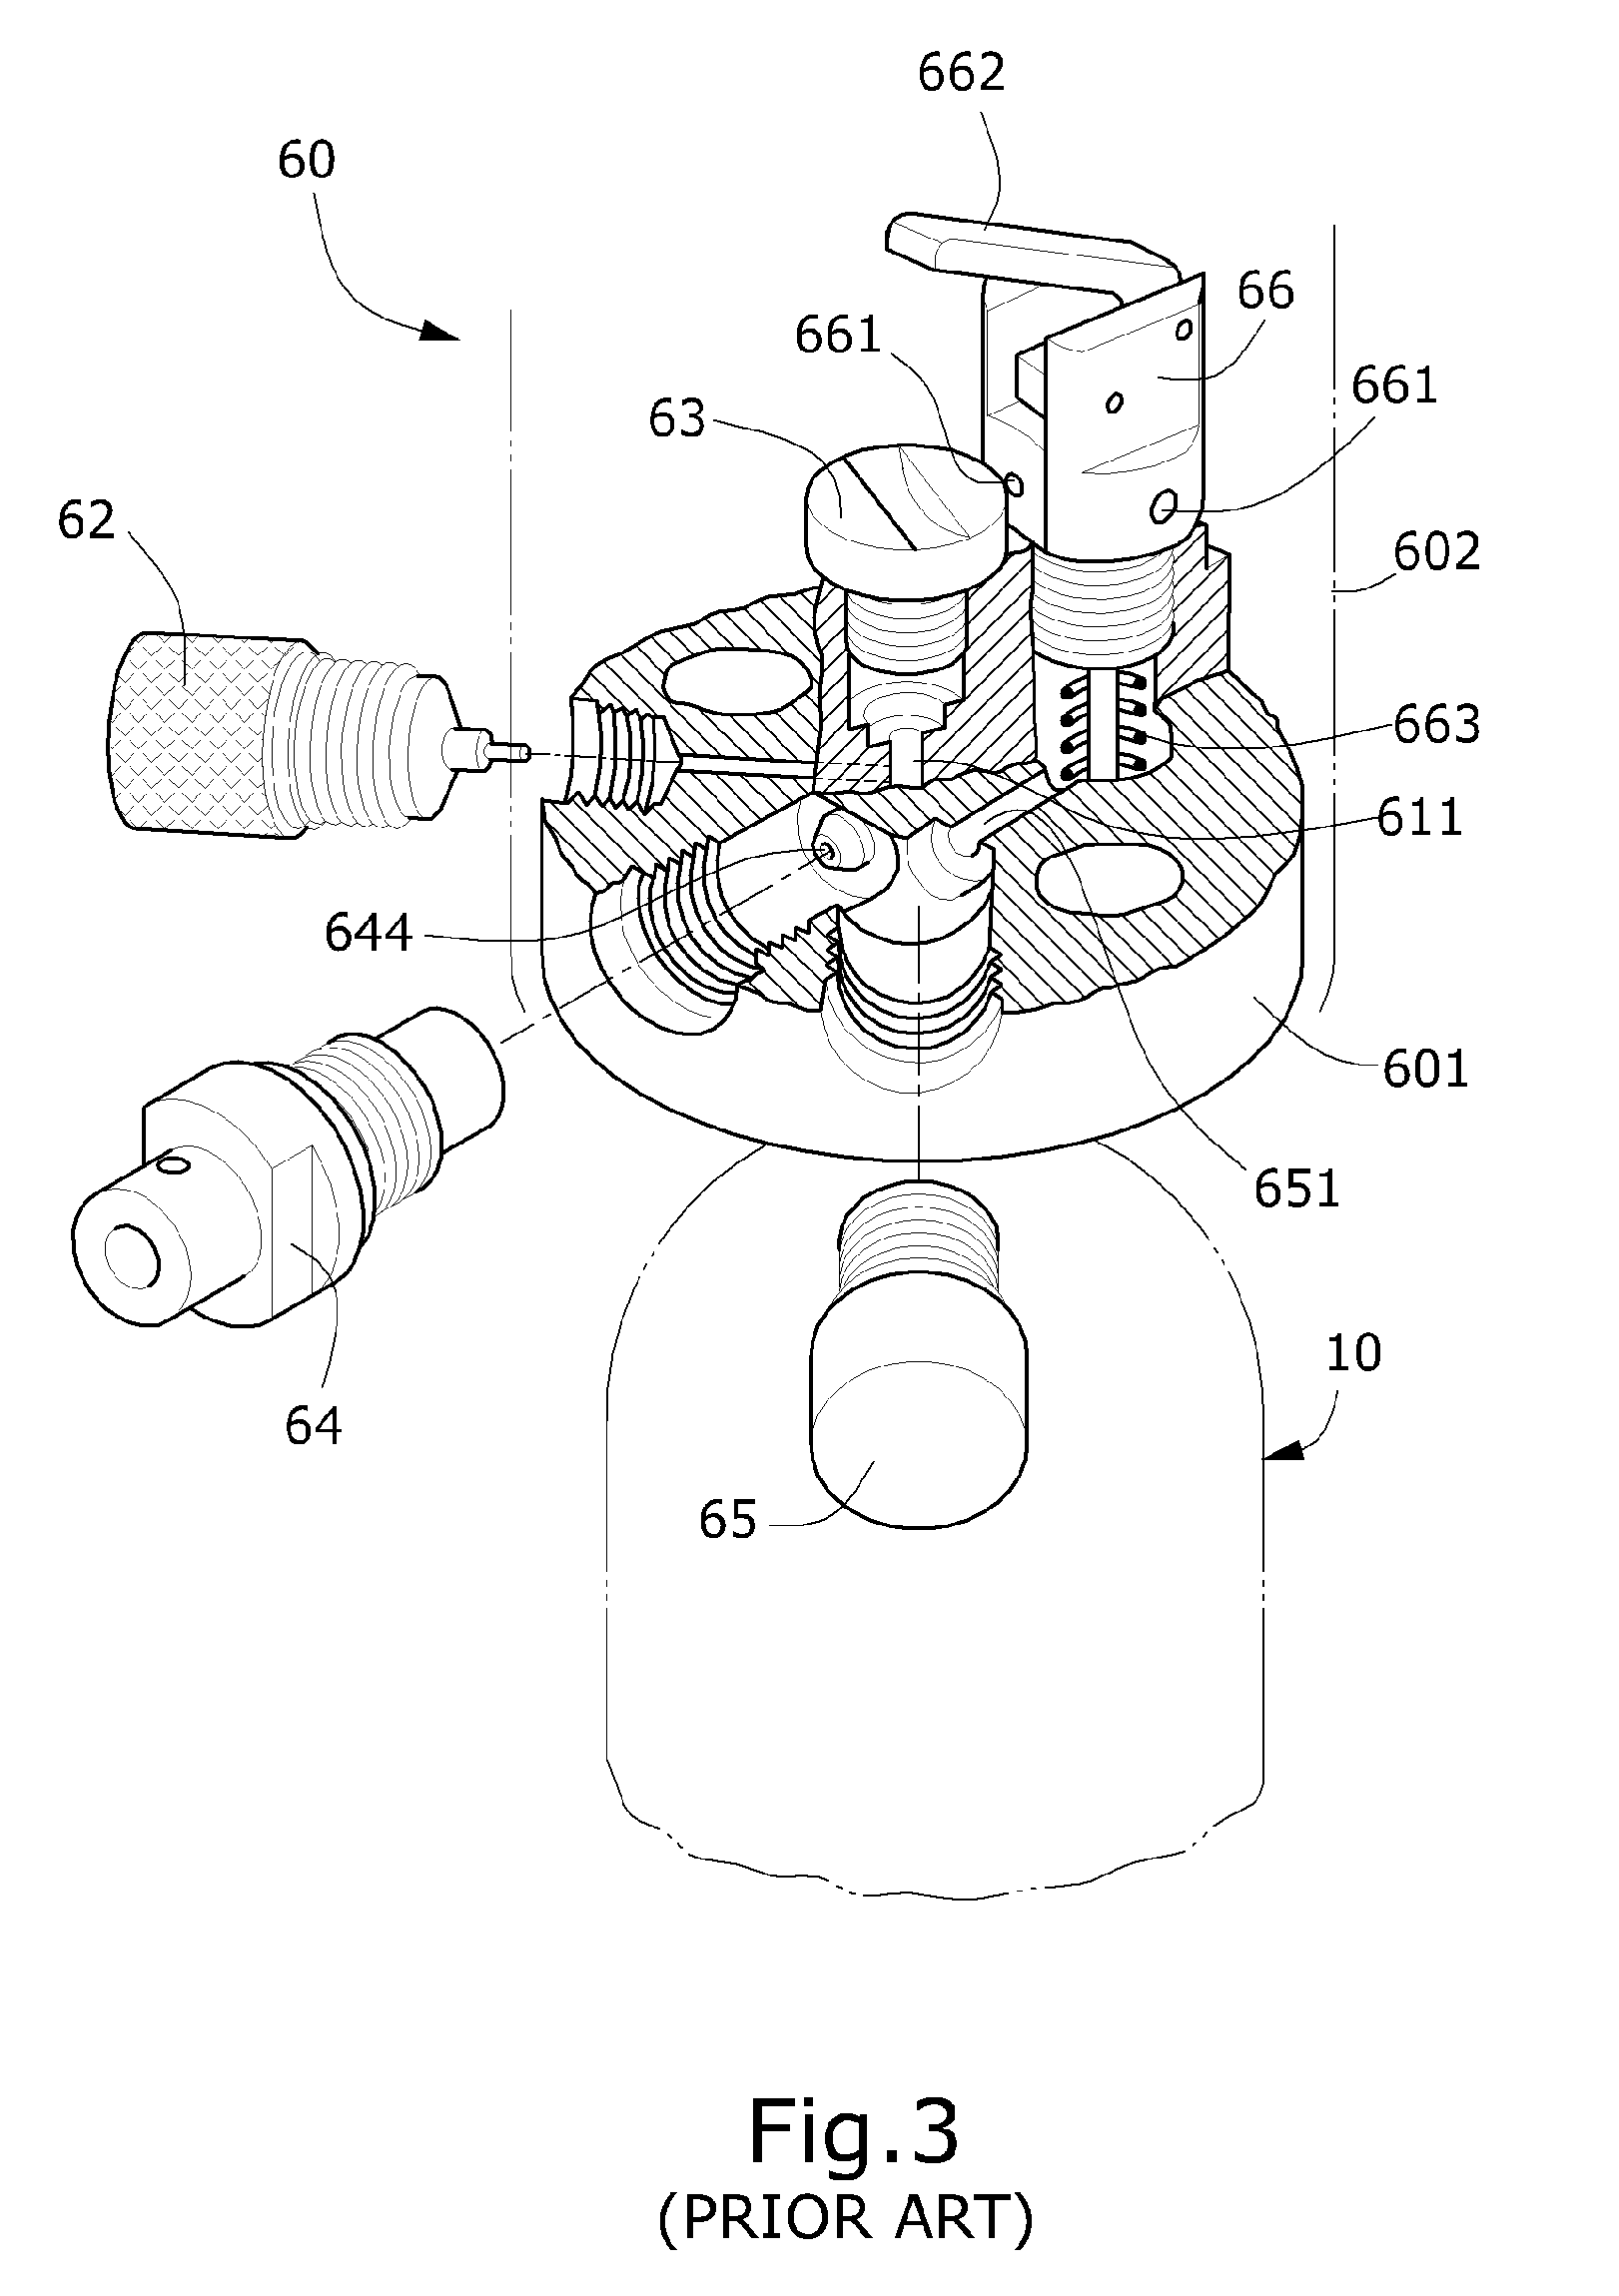 Breathing apparatus structure with two-stage reduced-pressure spare air bottle head